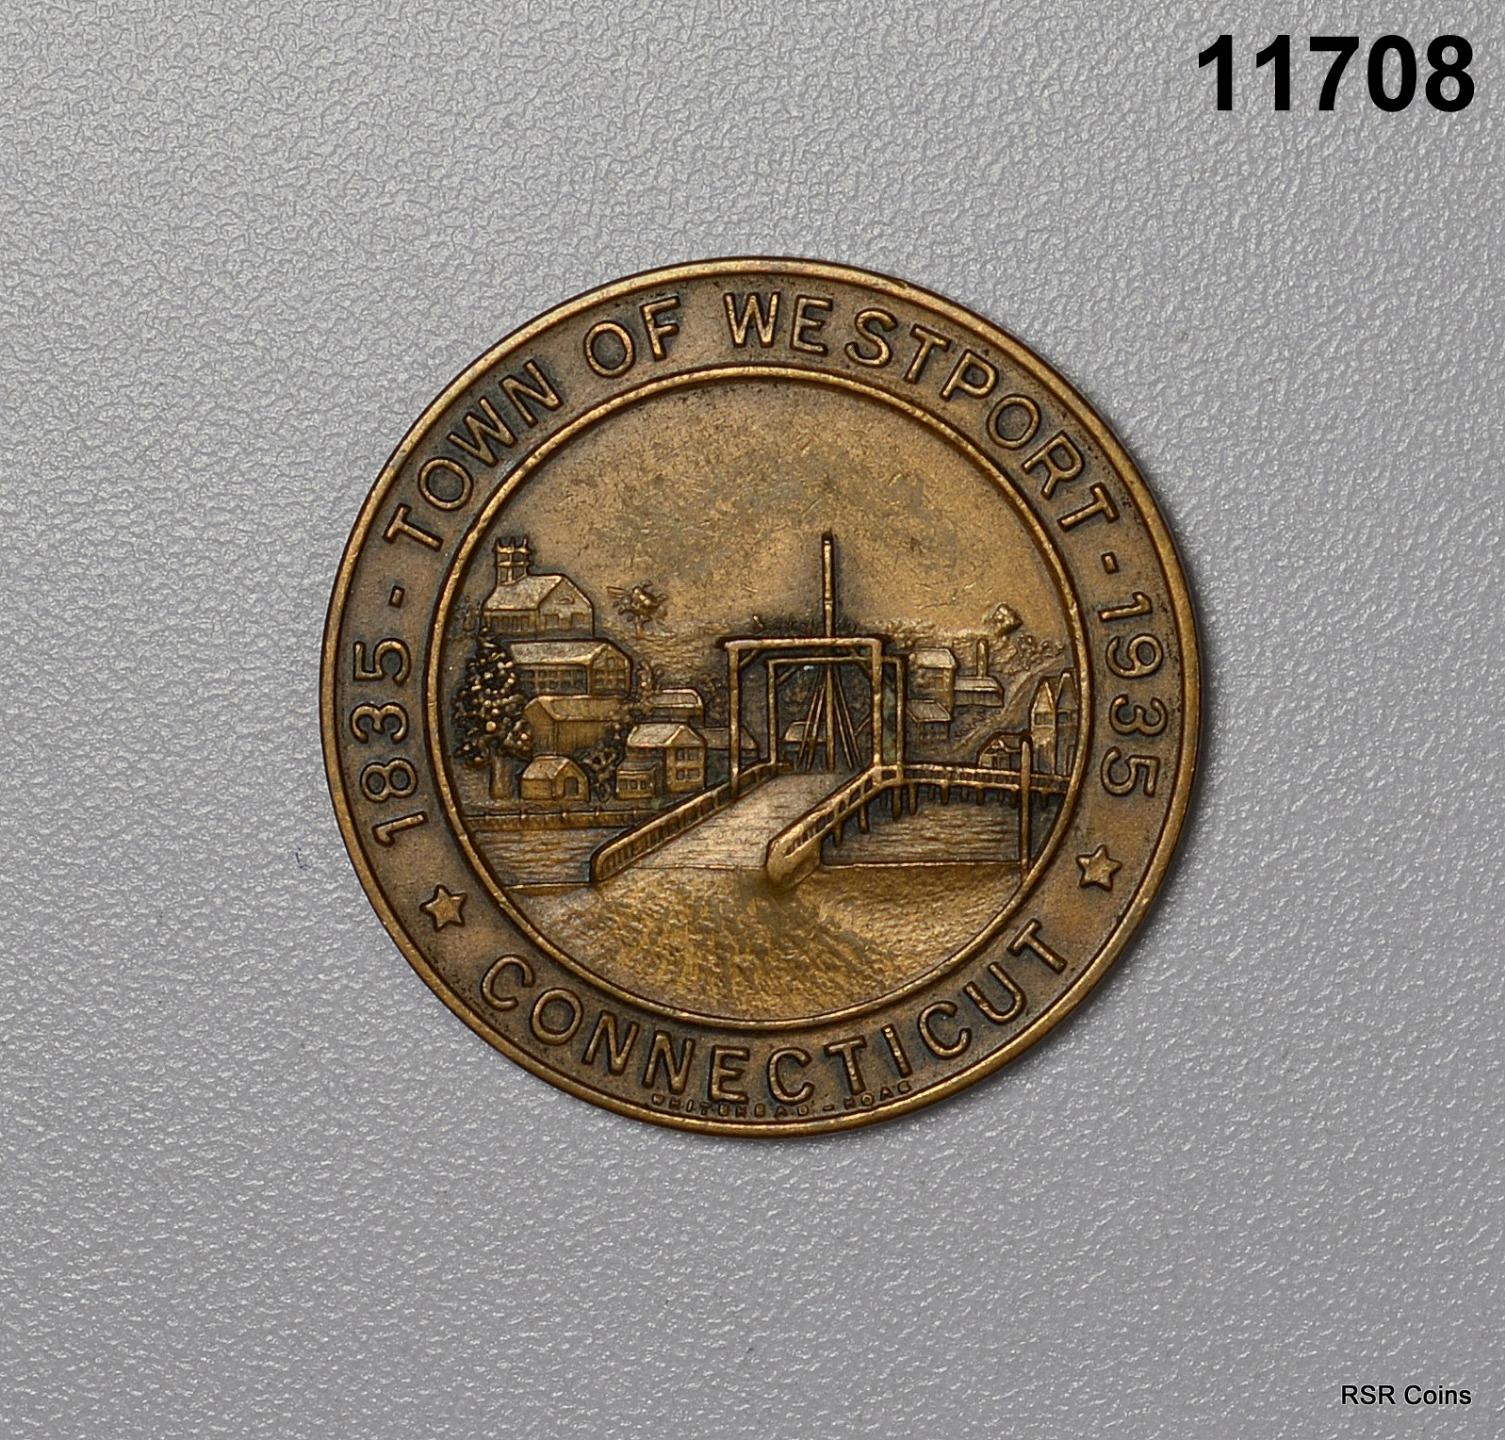 TOWN OF WESTPORT CT 1935 MINUTE MAN COMPO BEACH 1777 MEDAL 1-1/4" #11708